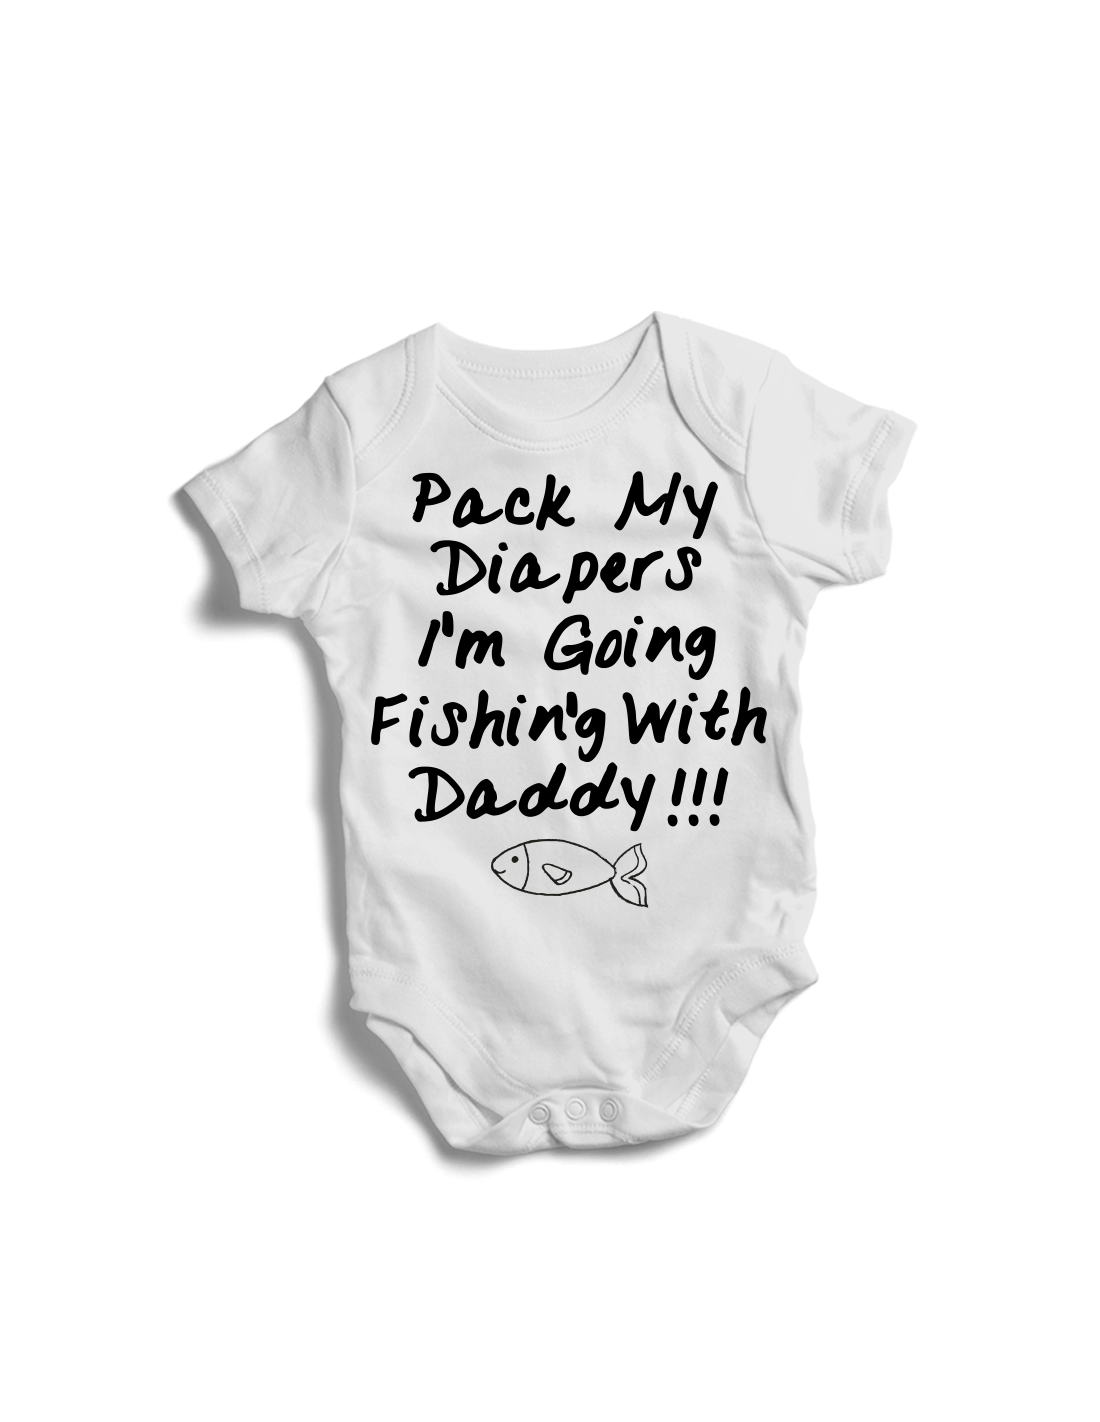 Pack my diapers, I'm going fishing with daddy!!! Baby onesie. Size New Born  Sleeves Short Sleeve